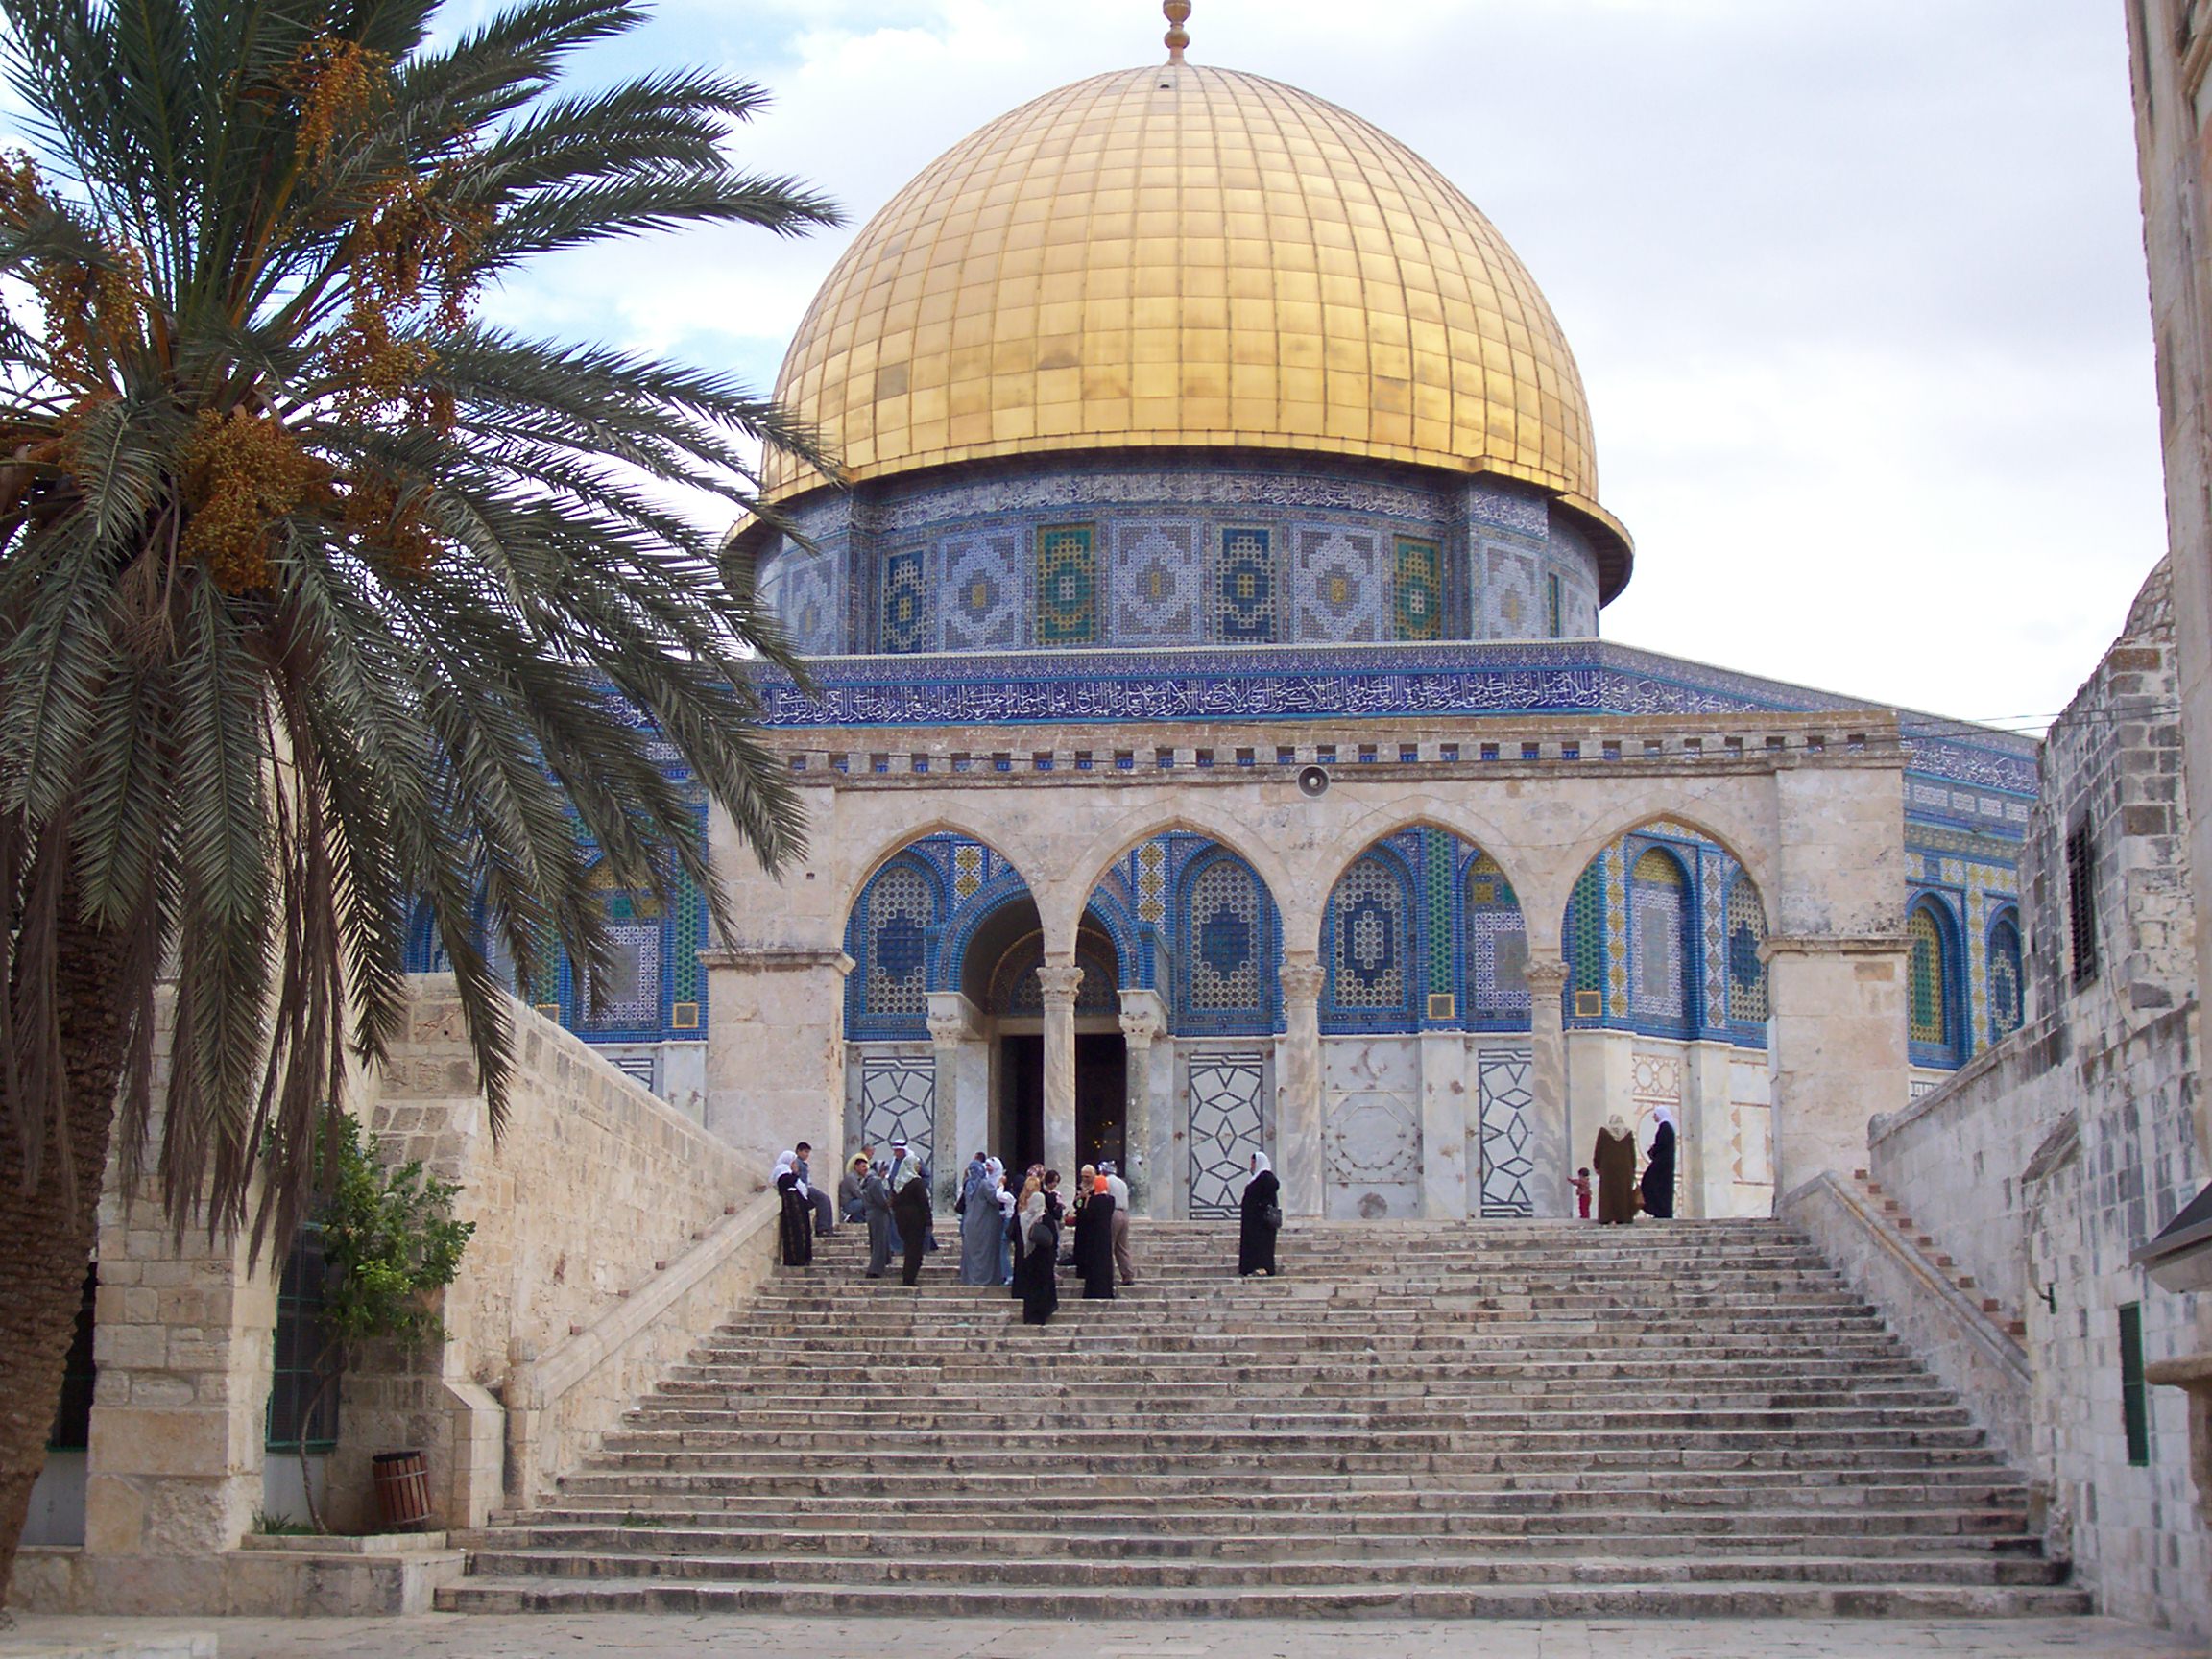 Dome Of The Rock Backgrounds, Compatible - PC, Mobile, Gadgets| 2304x1728 px